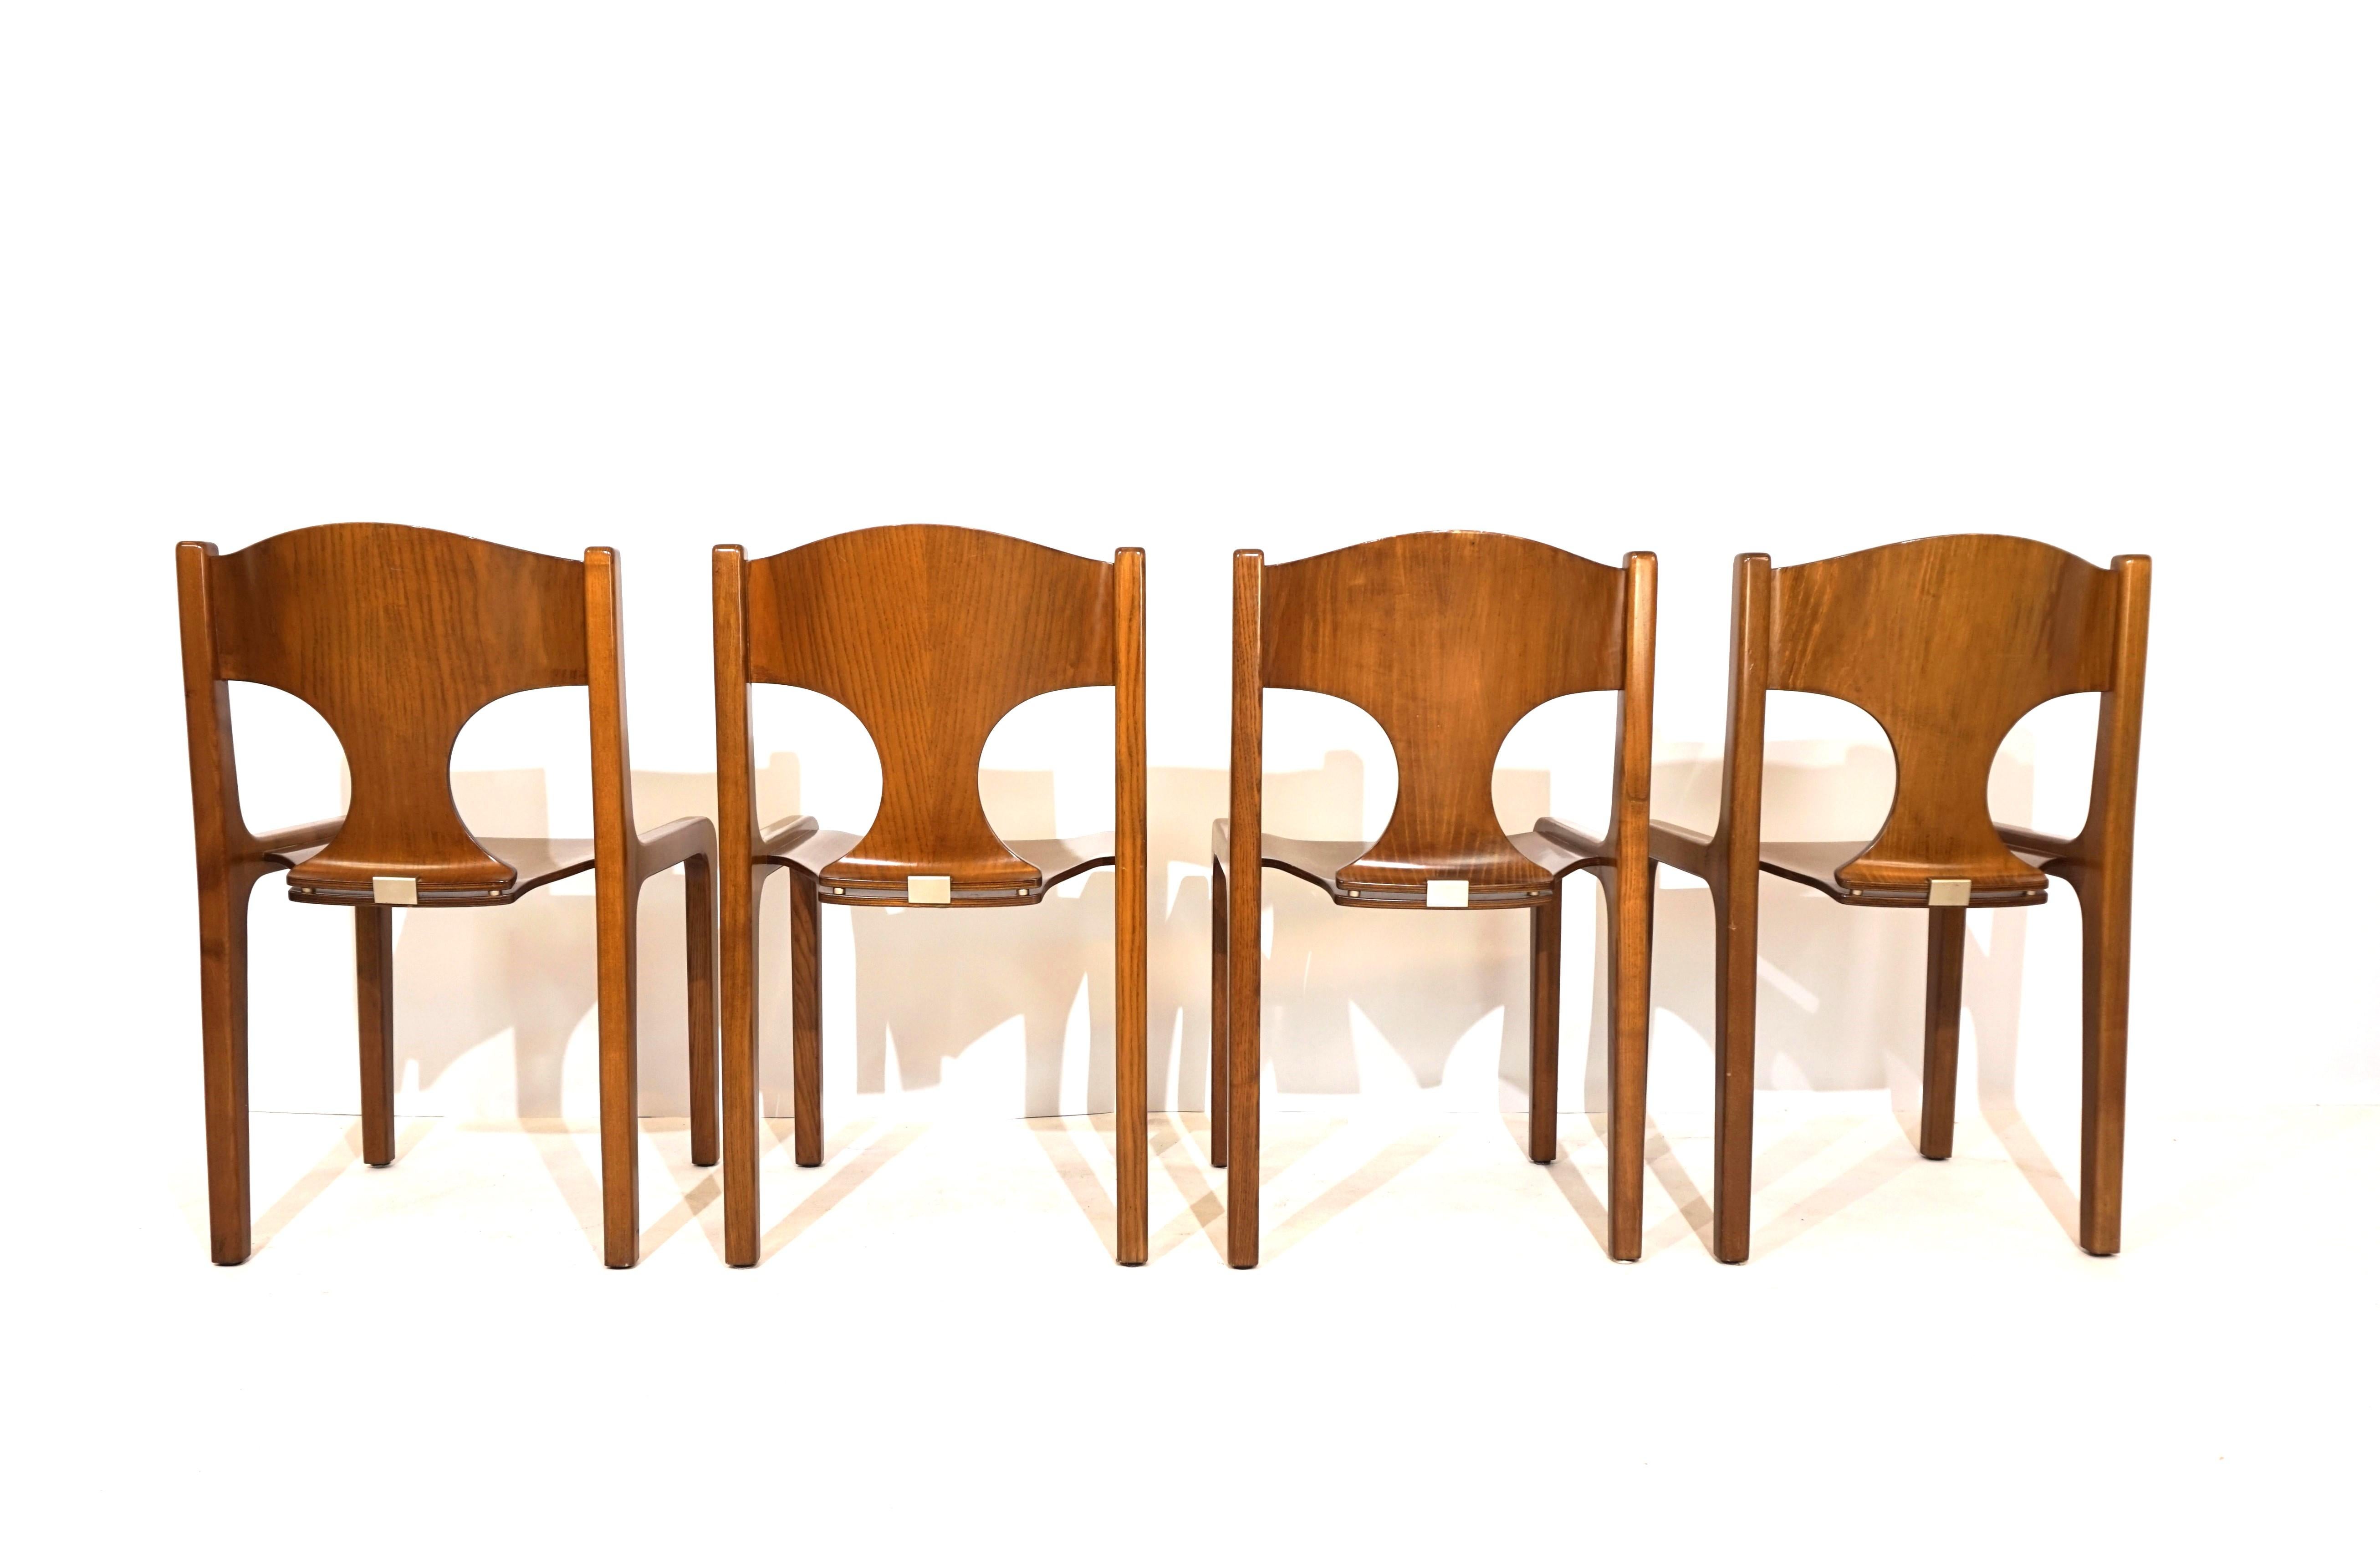 The set of 4 dining chairs is in excellent condition. The honey-colored wood of the chairs shows almost no signs of wear and an attractive grain. The chairs have a very elegant appearance and probably date from the 70s. The Italian architect Augusto